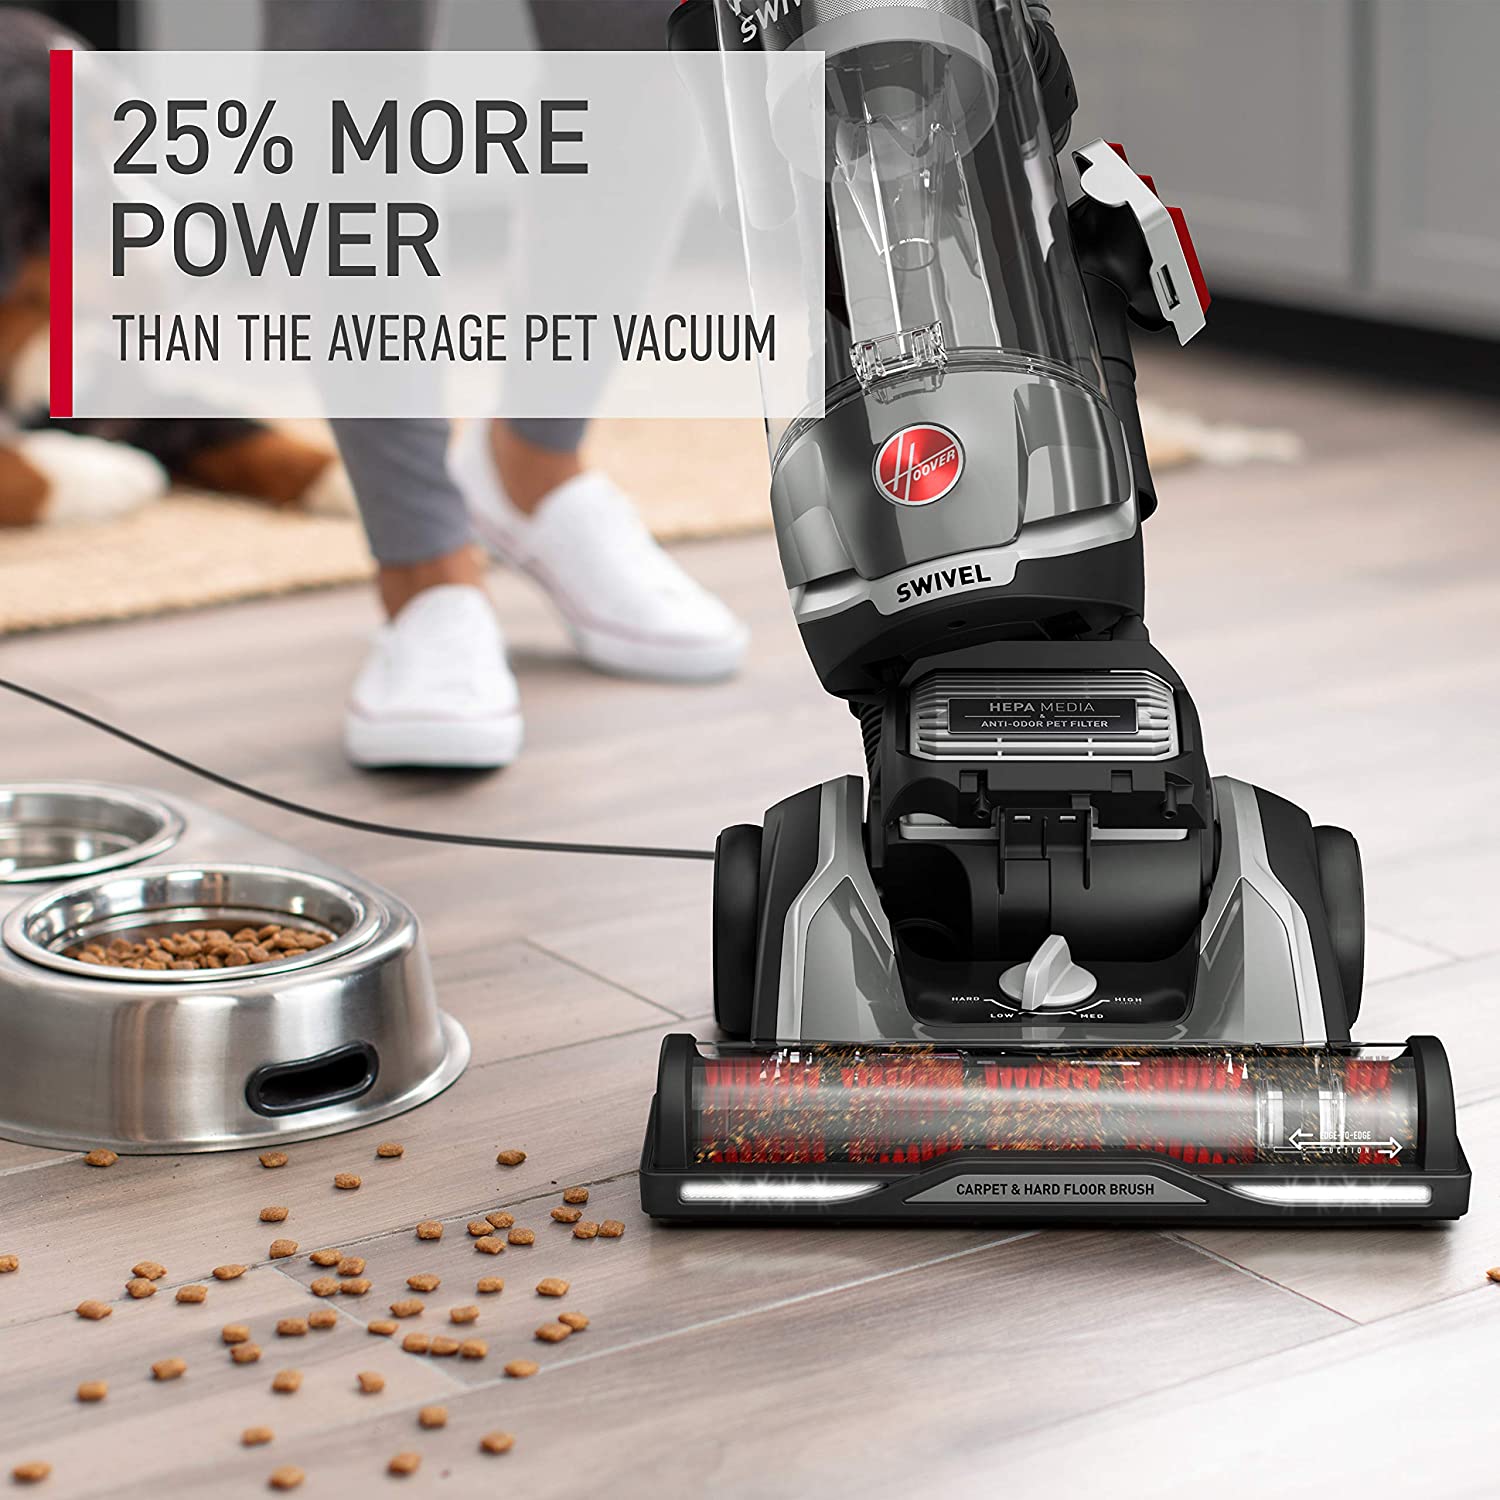 Hoover R-UH75200 MAXLife Elite Swivel XL Pet Vacuum Cleaner with HEPA Filtration, Bagless for Carpets and Hard Floors, Grey - Certified Refurbished